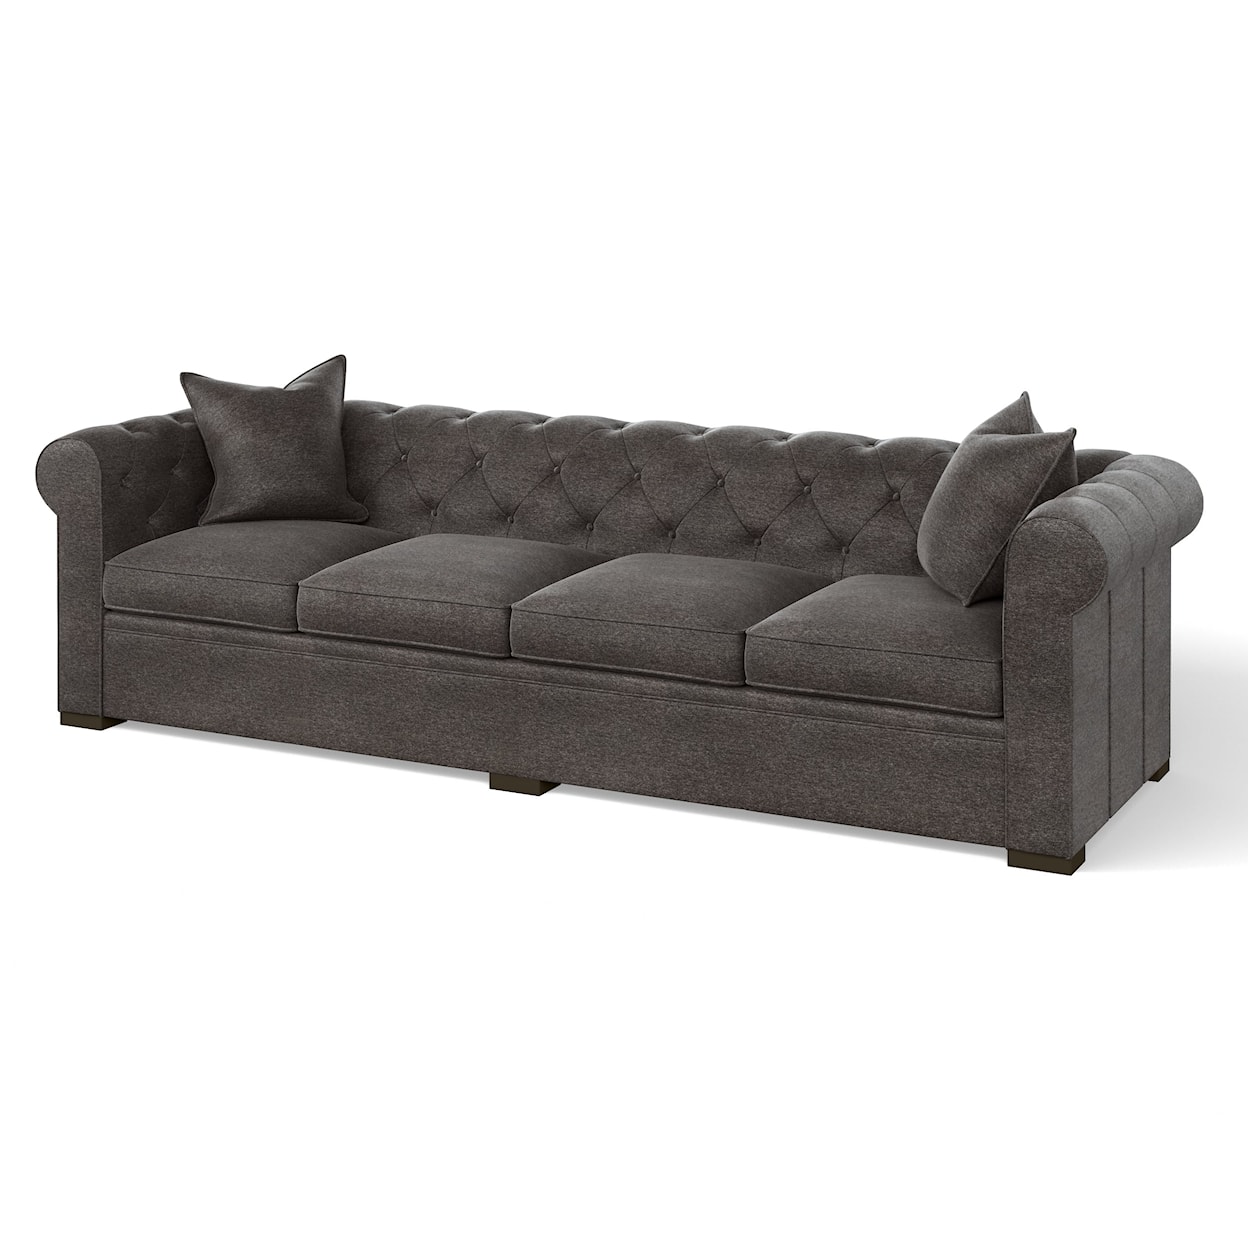 Century Chesterfield Classic Chesterfield Large Sofa